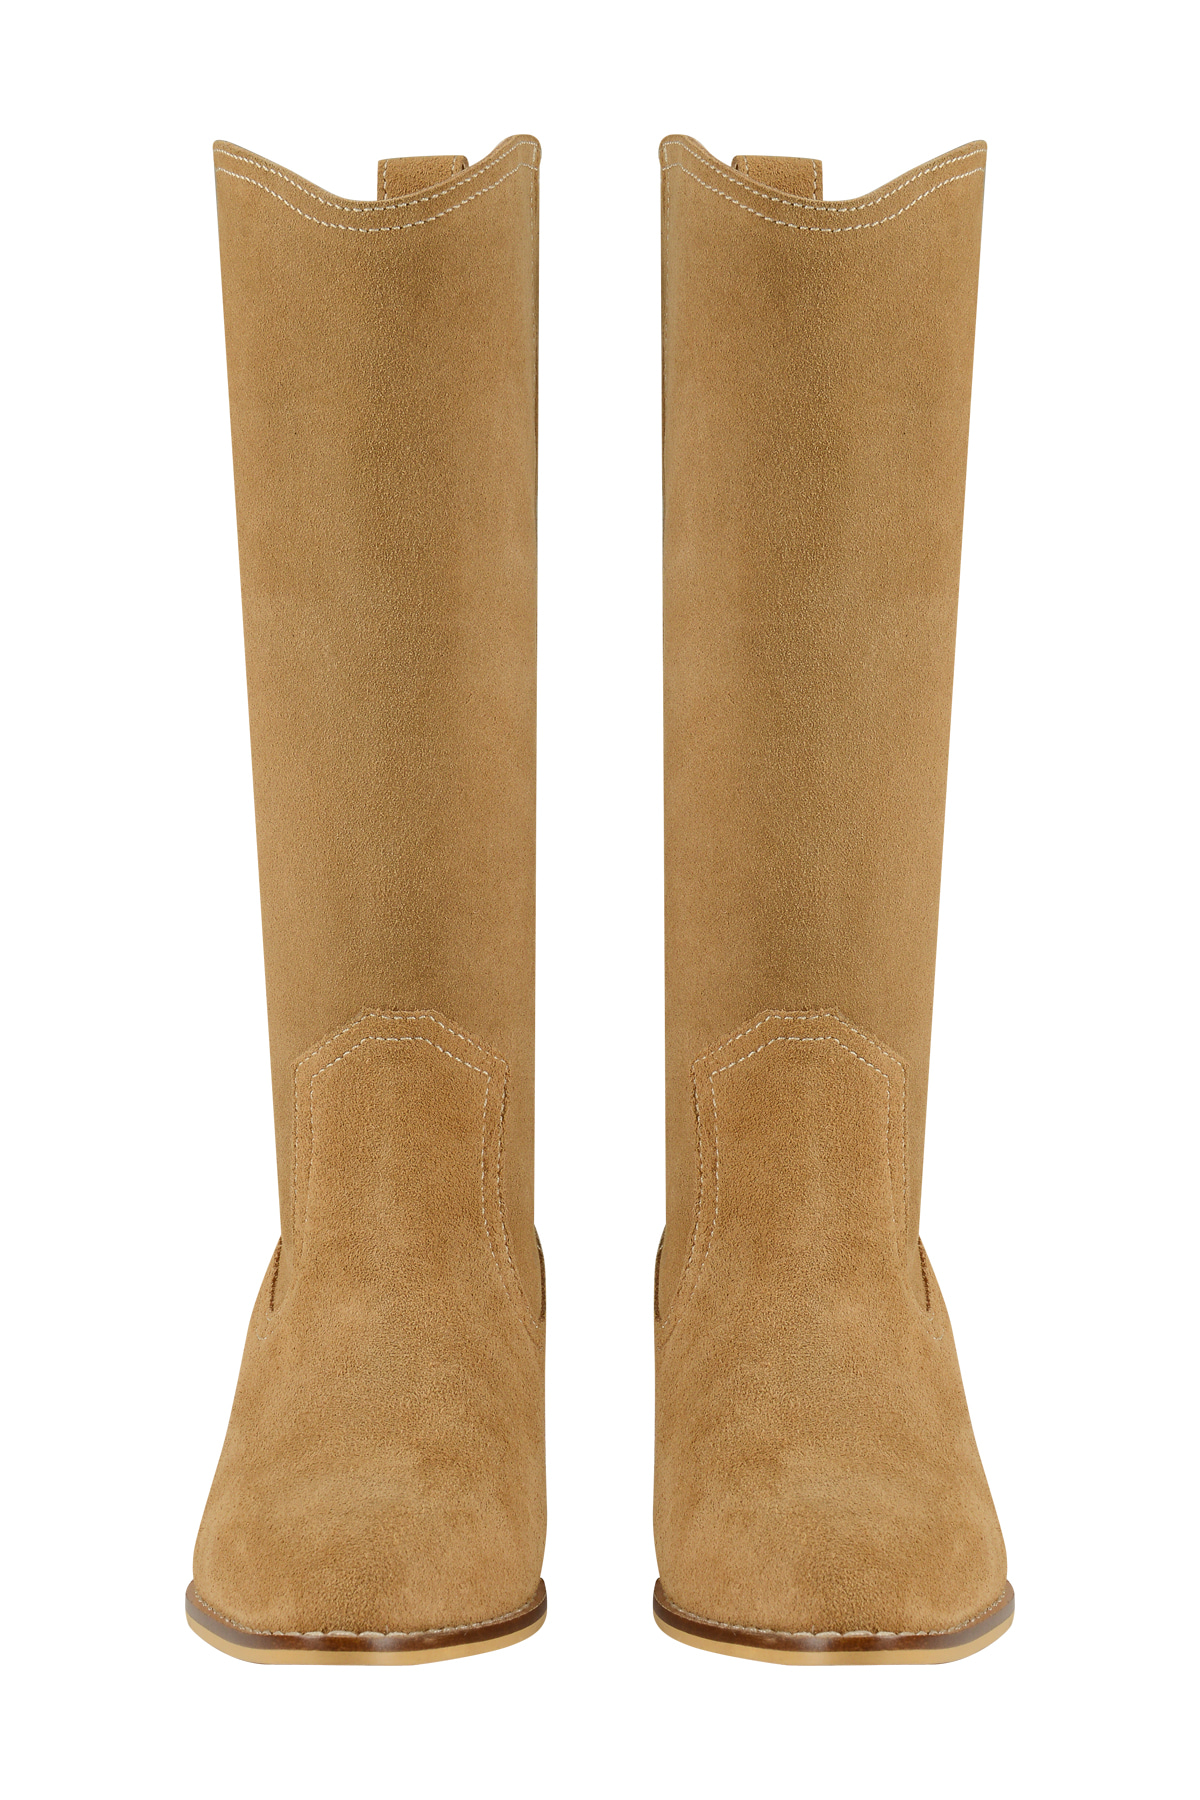 WESTERN MIDDLE BOOTS IN CAMEL